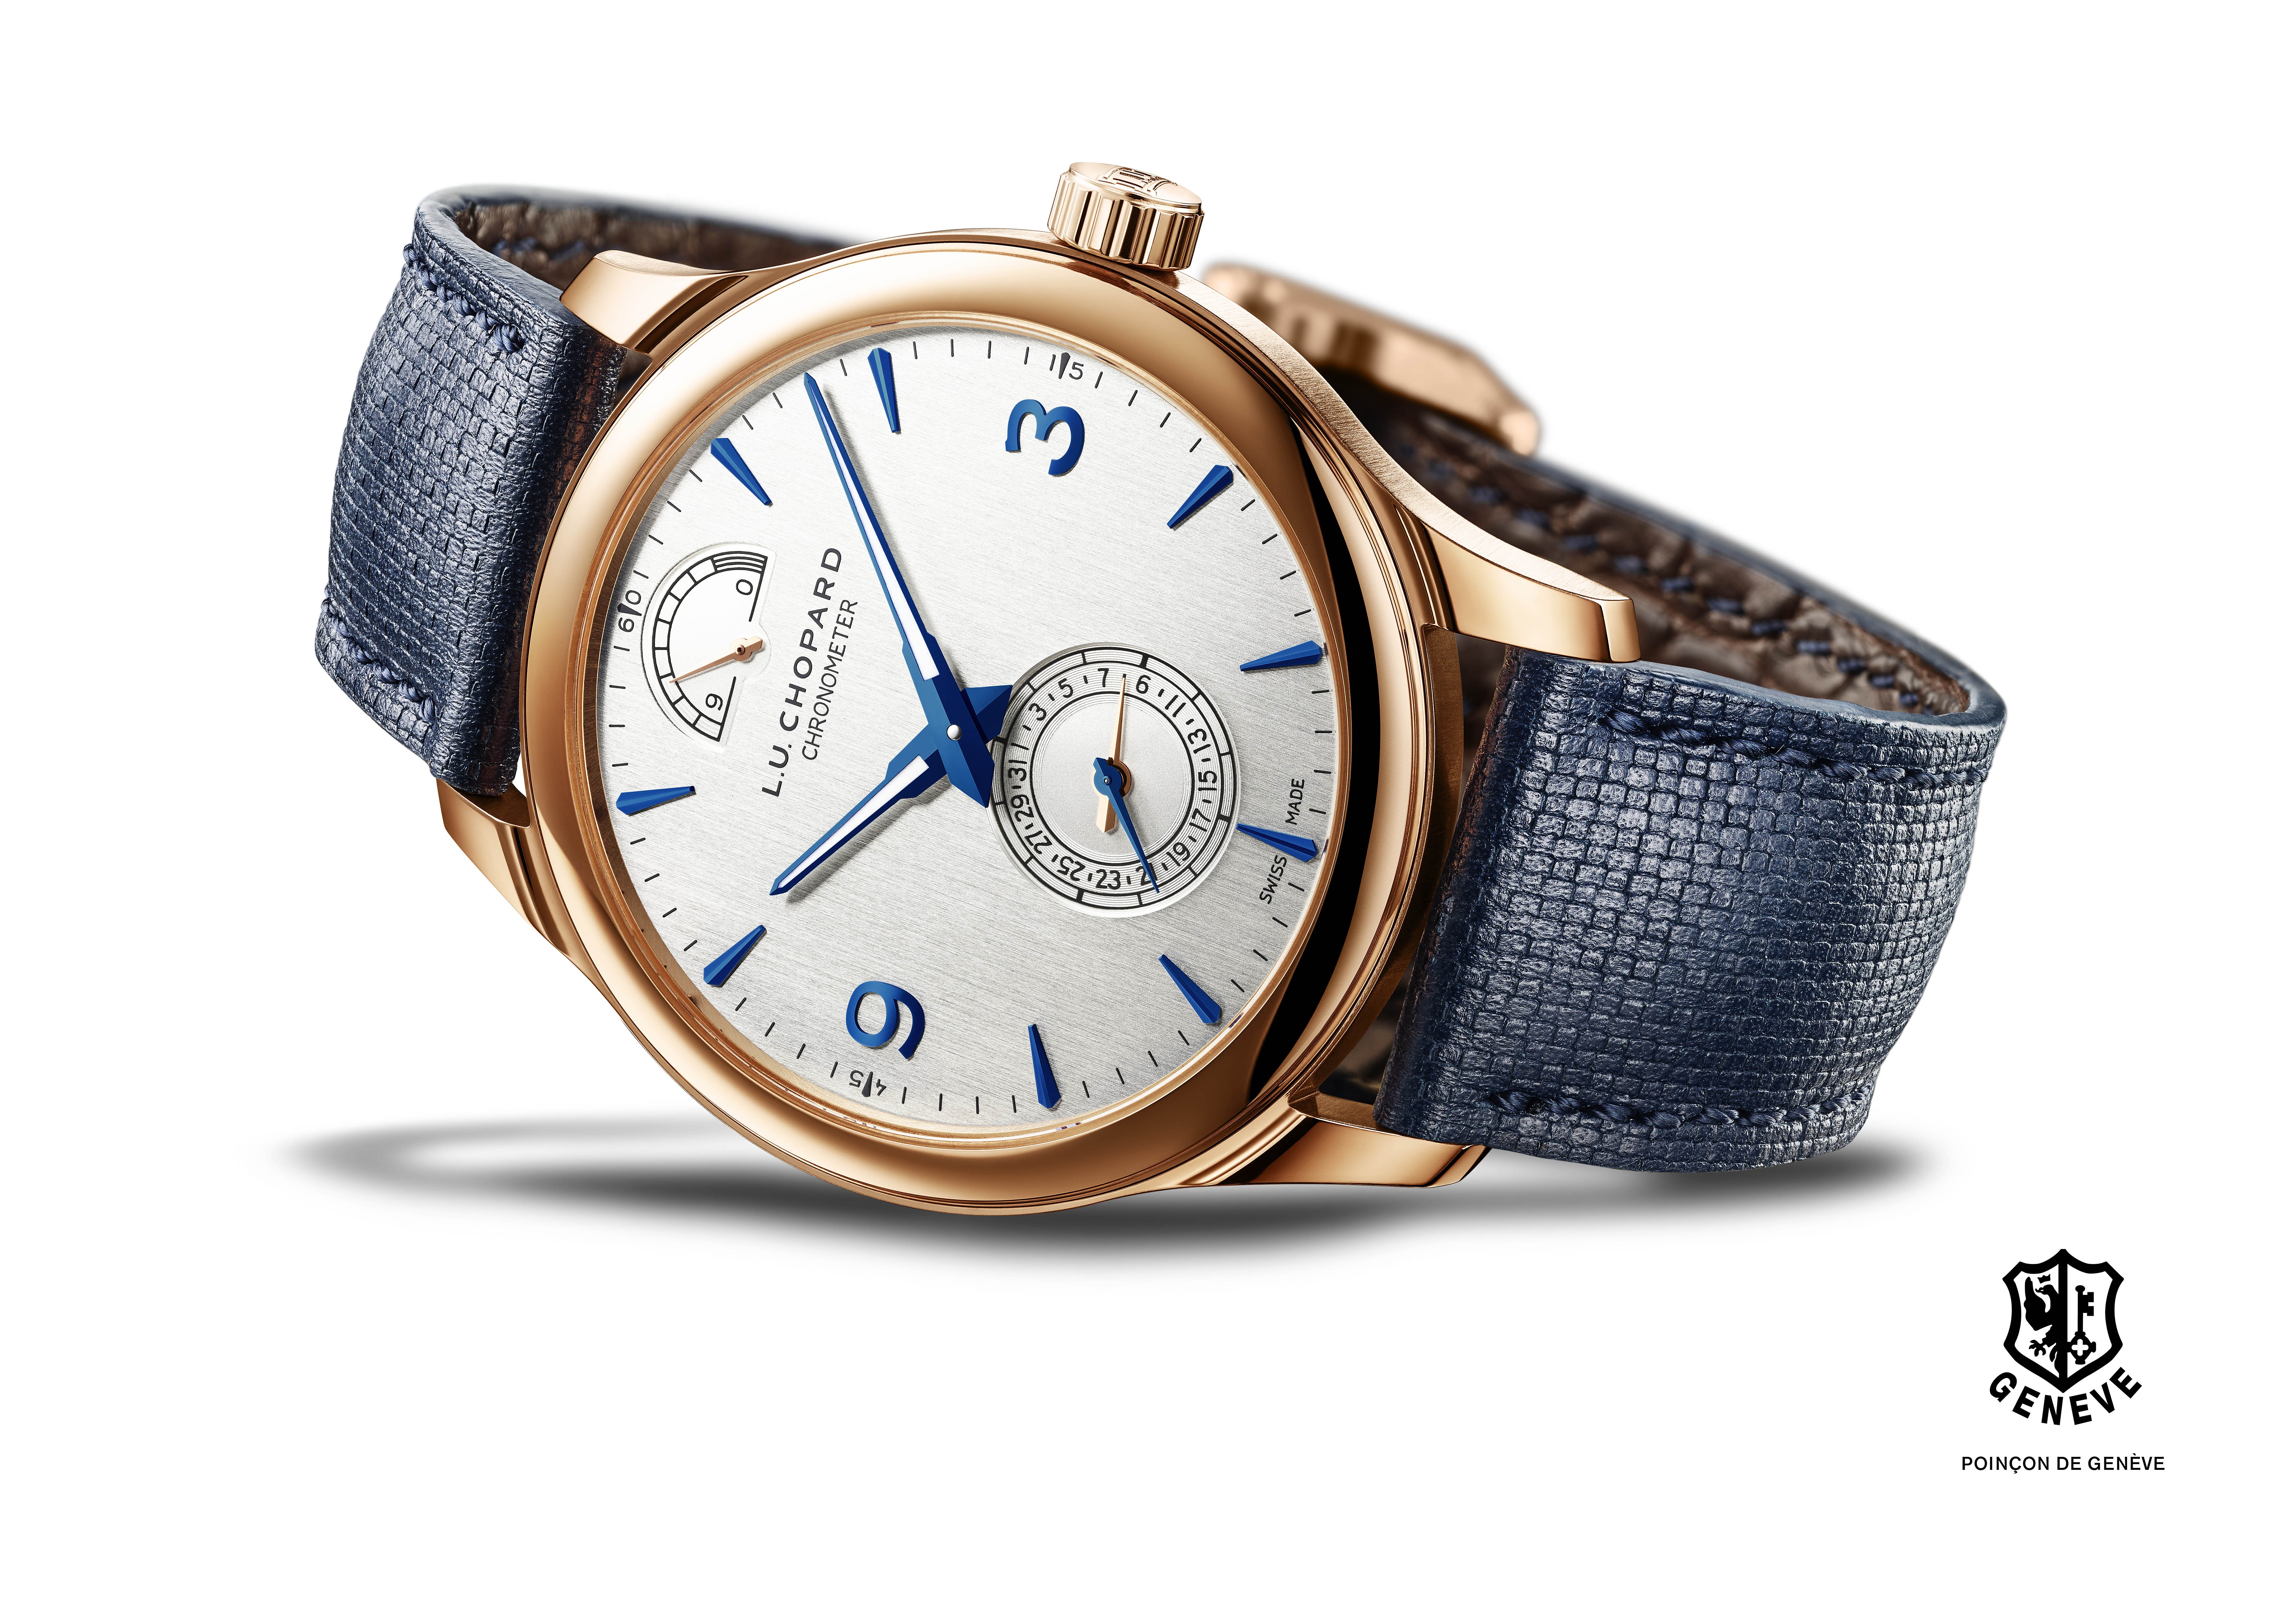 Chopard’s new L.U.C Quattro features a sleek aesthetic paired with an advanced movement. 